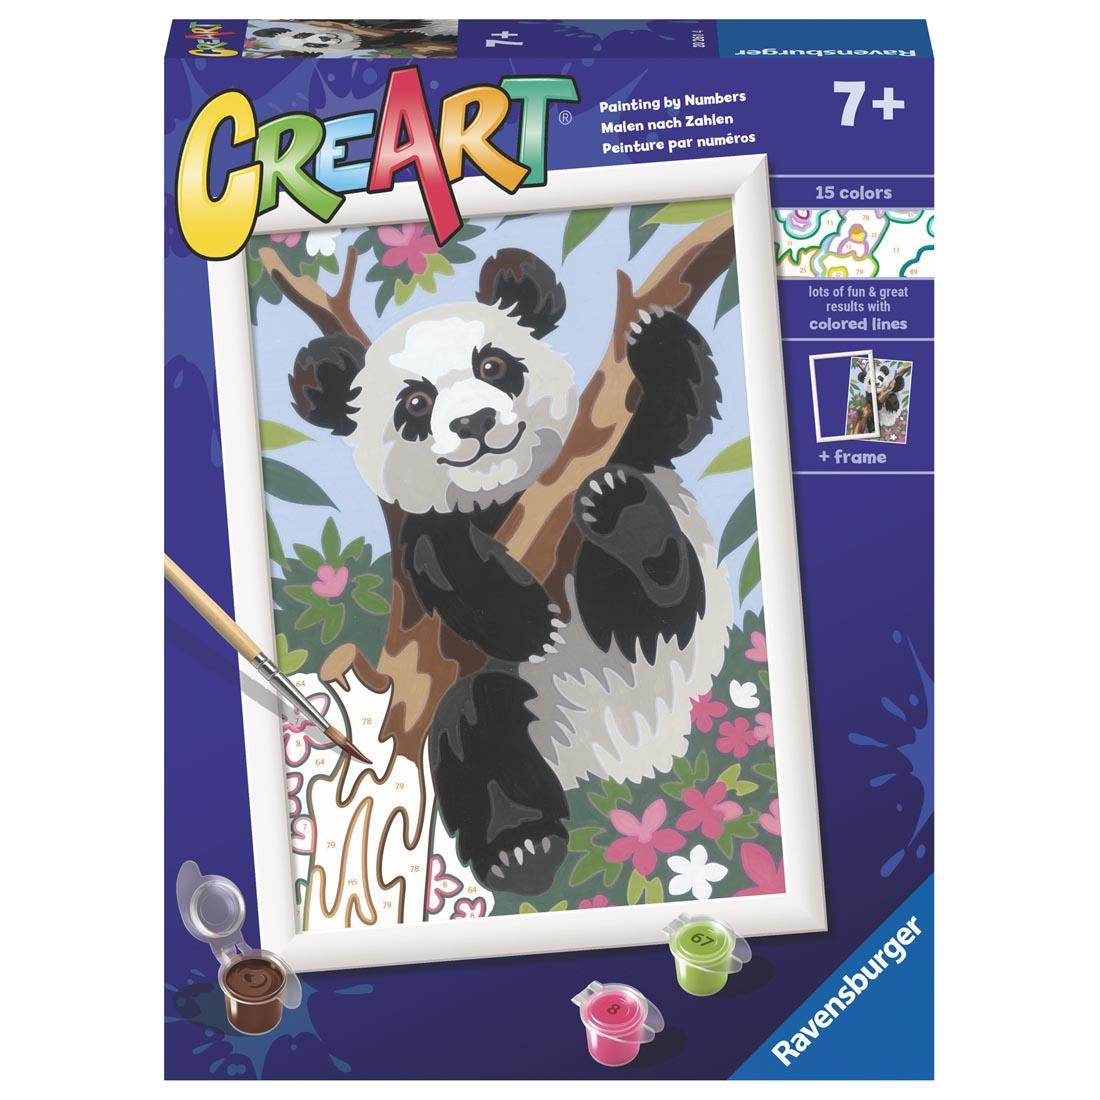 Playful Panda Kids Paint By Number Set By Ravensburger